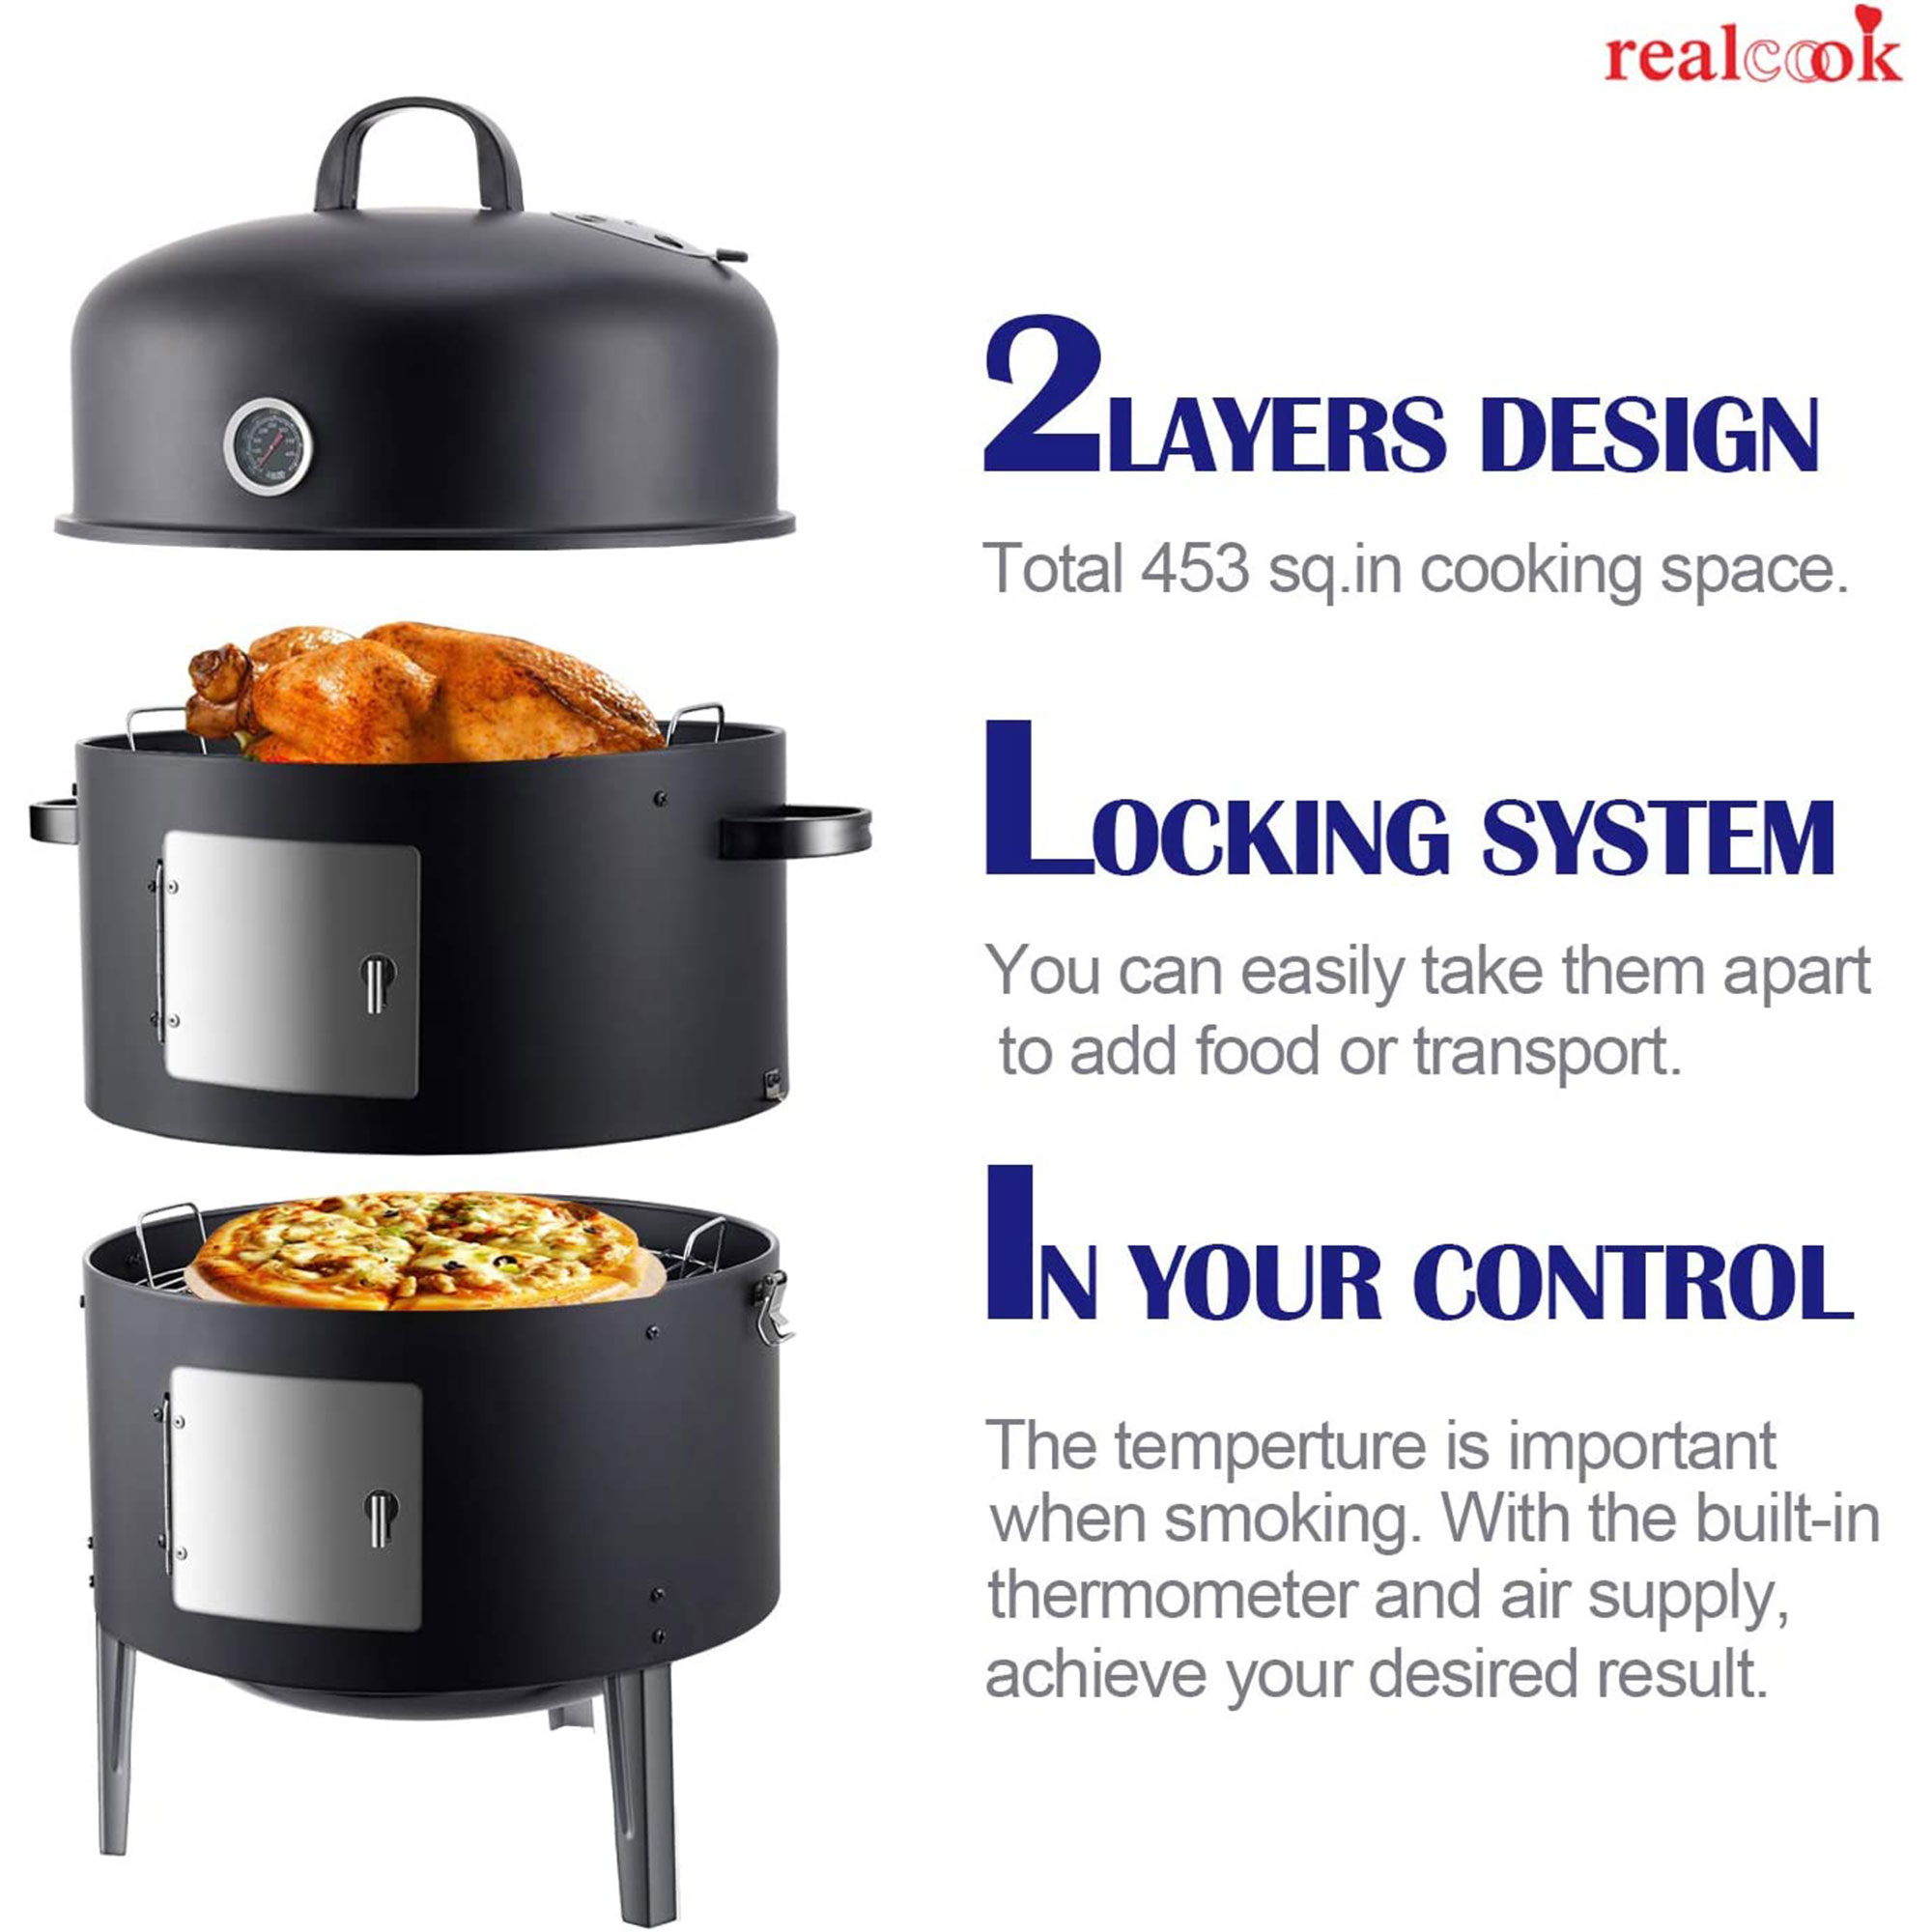 Realcook 17 inch Vertical Heavy Duty Steel Charcoal Outdoor Smoker, Black - image 3 of 9